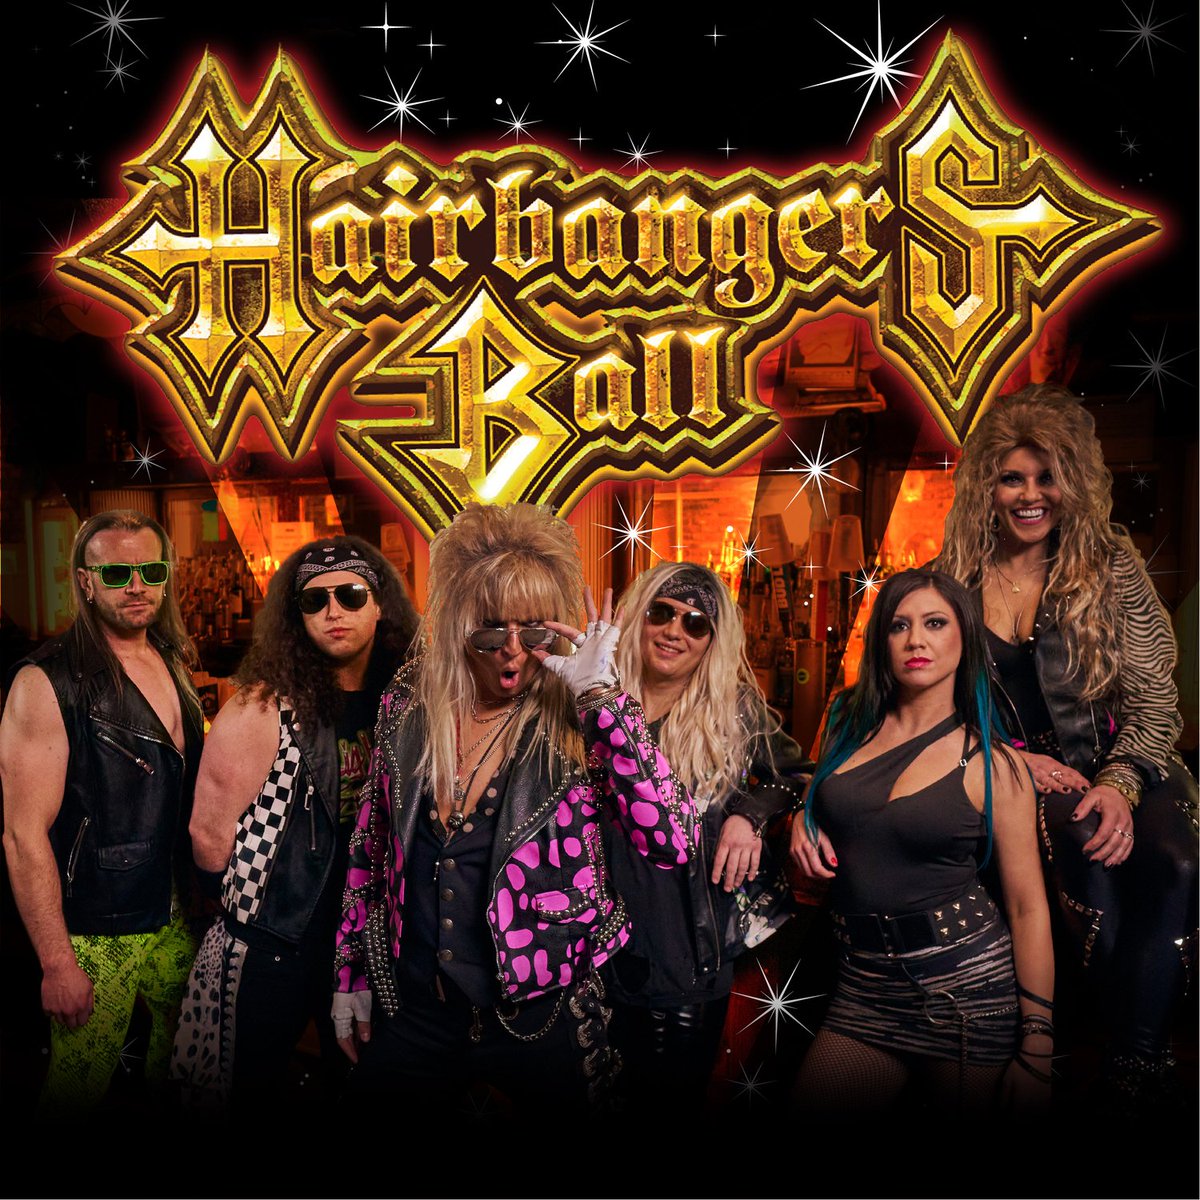 JUST ANNOUNCED: Don't miss the return of your favorite 80's metal cover band @Hairbangersball to #TheVogueIndy on Friday, Jan. 28! 🎟️ Tickets available NOW at TheVogue.com